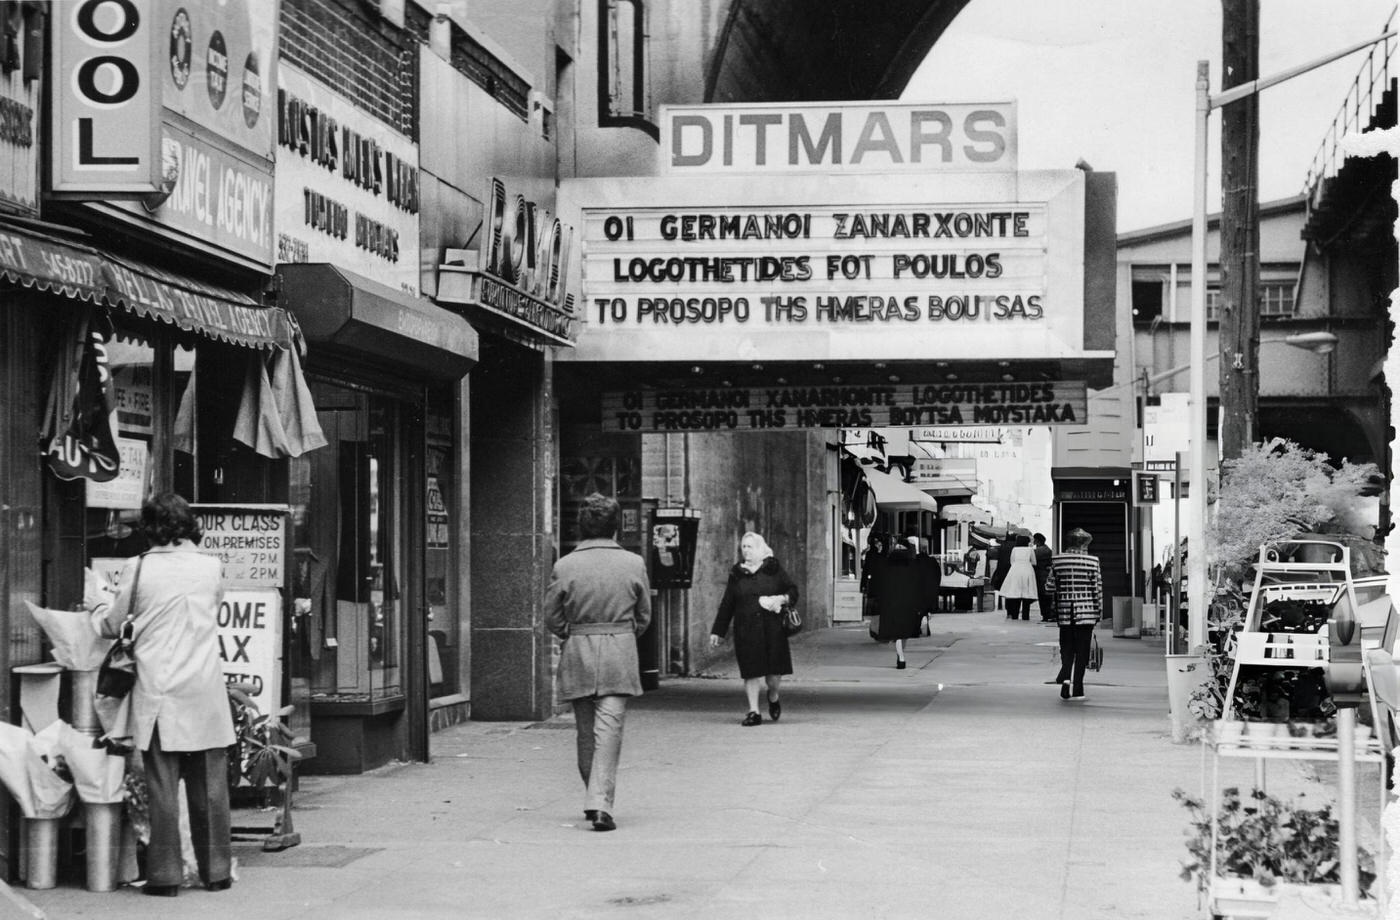 Ditmars Theatre, A Local Movie House, Showing Greek Movies On 31St Street In Astoria, Queens, 1977.